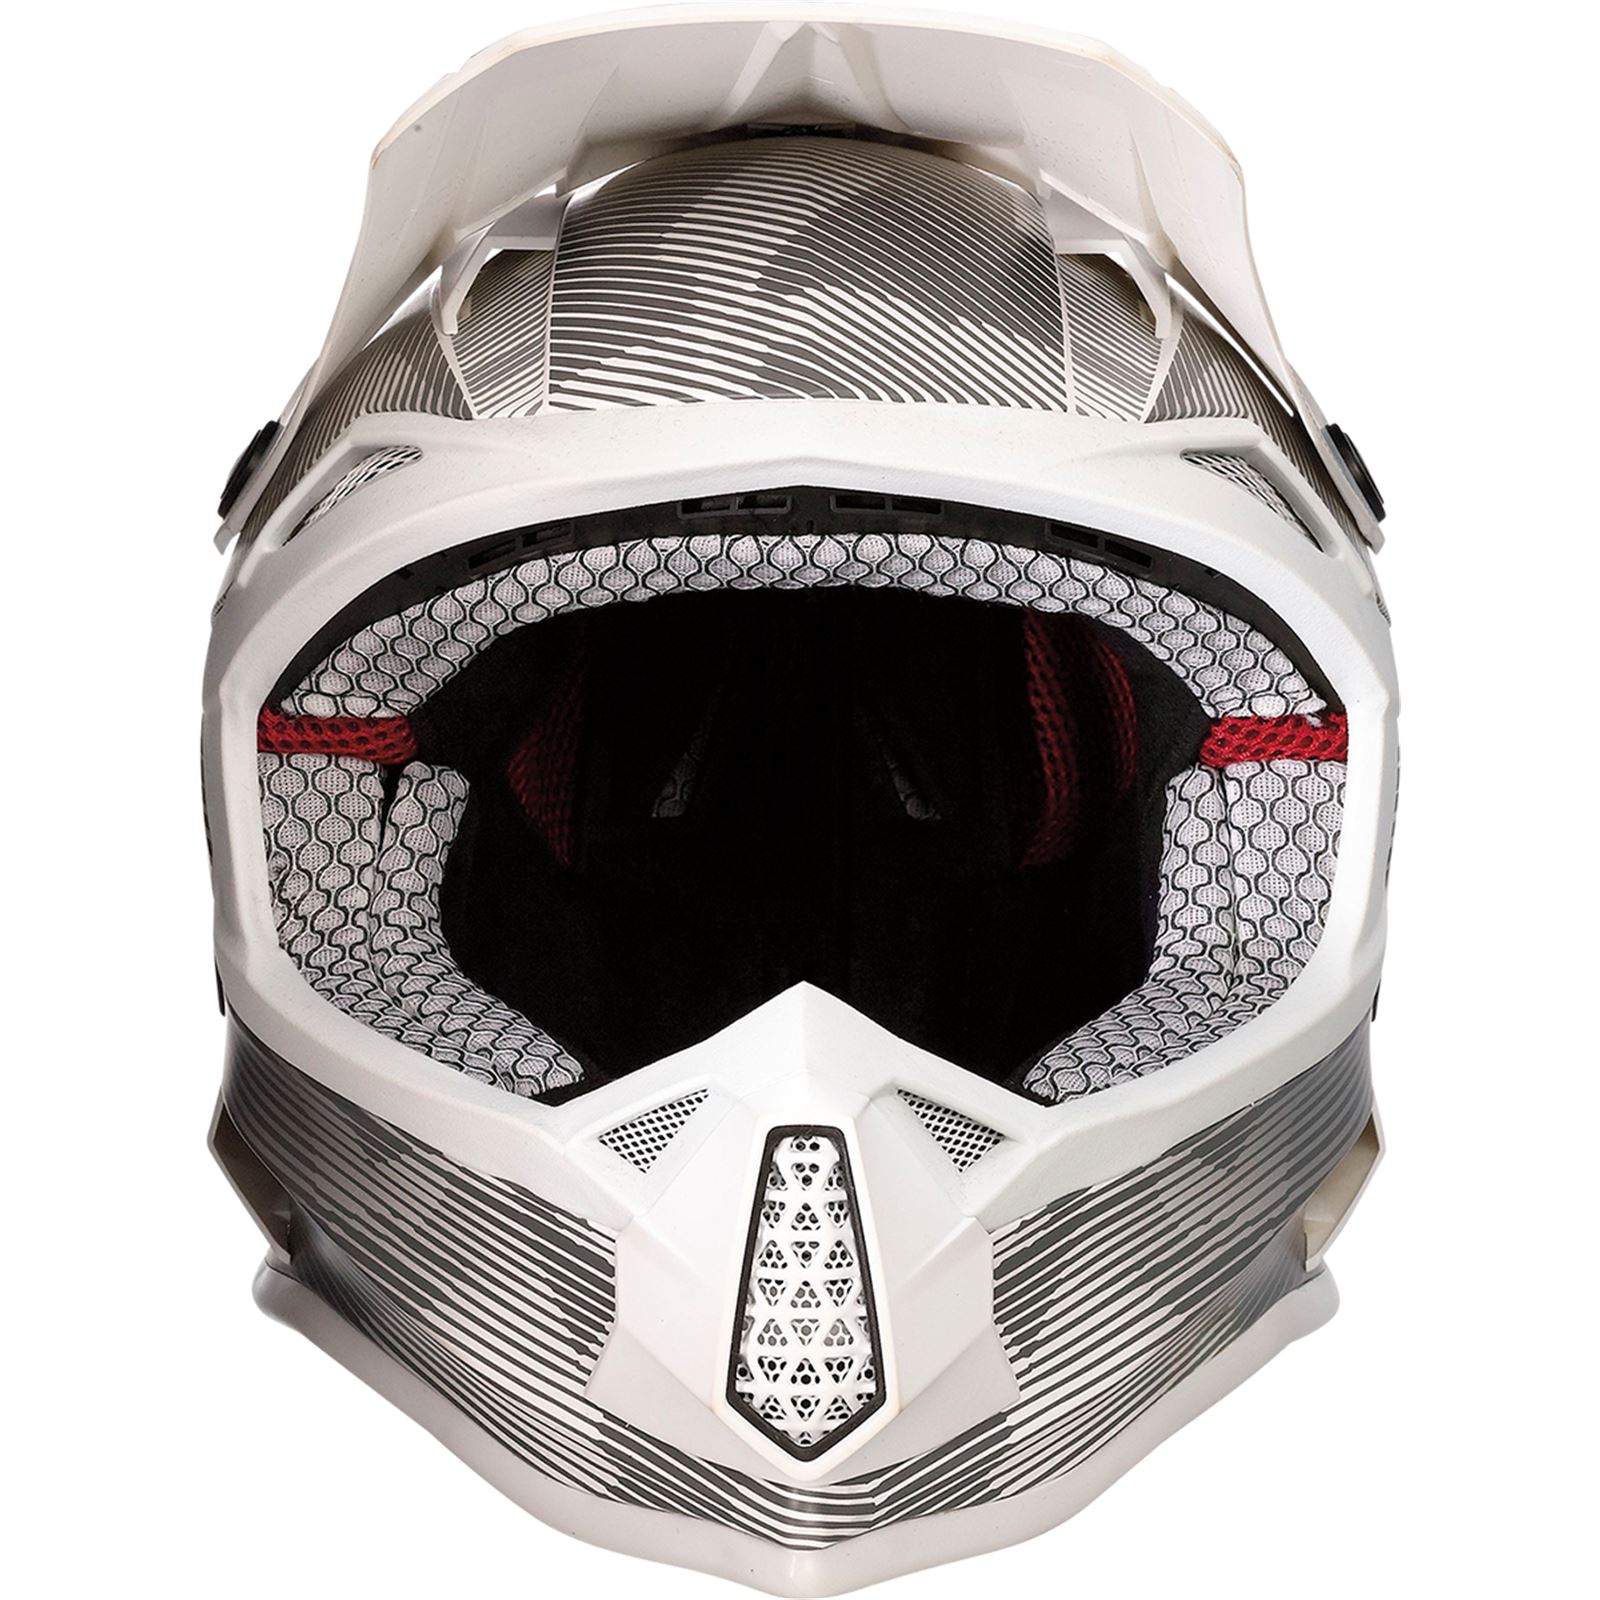 Moose Racing Youth F.I. Helmet - Agroid Camo - MIPS® - Gray/White